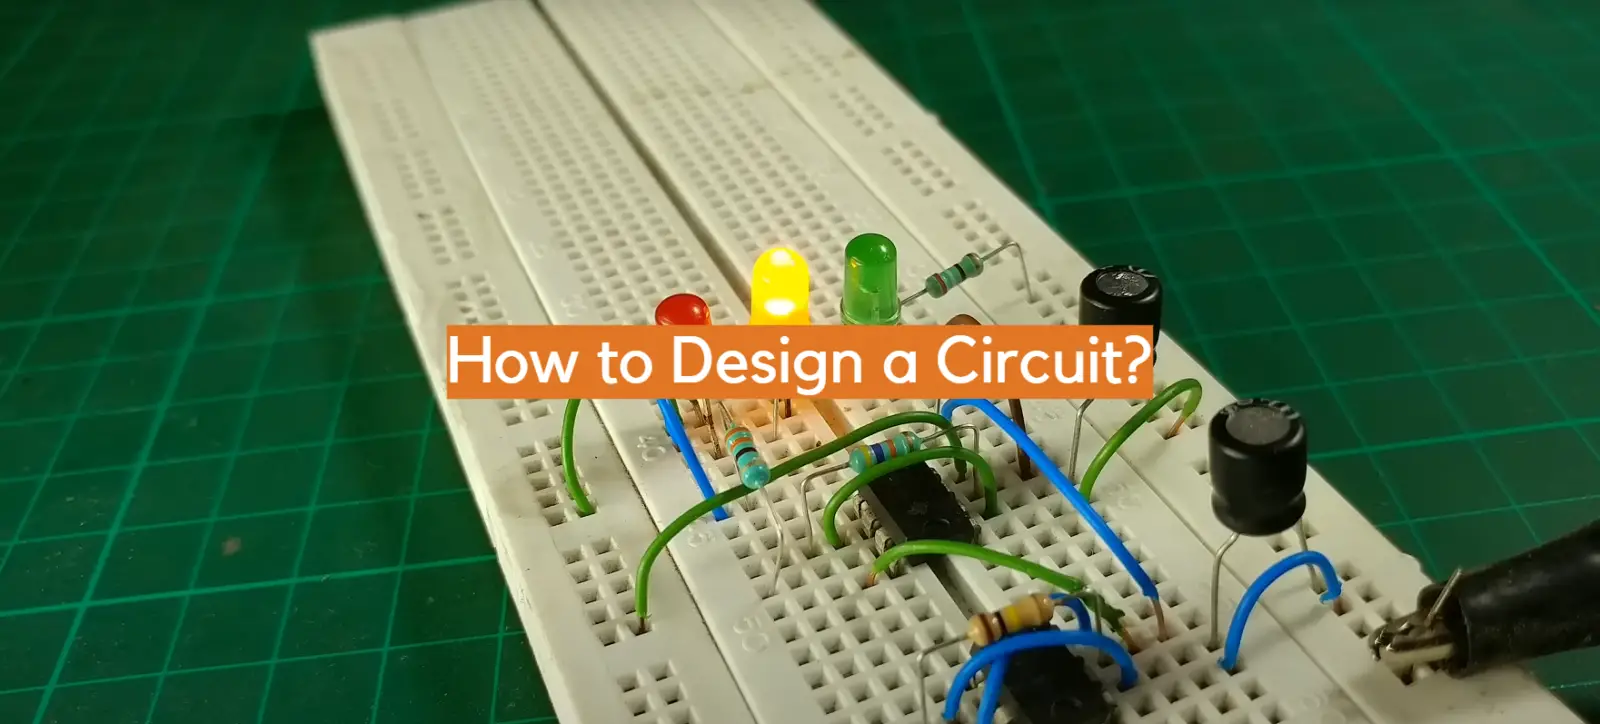 How to Design a Circuit?